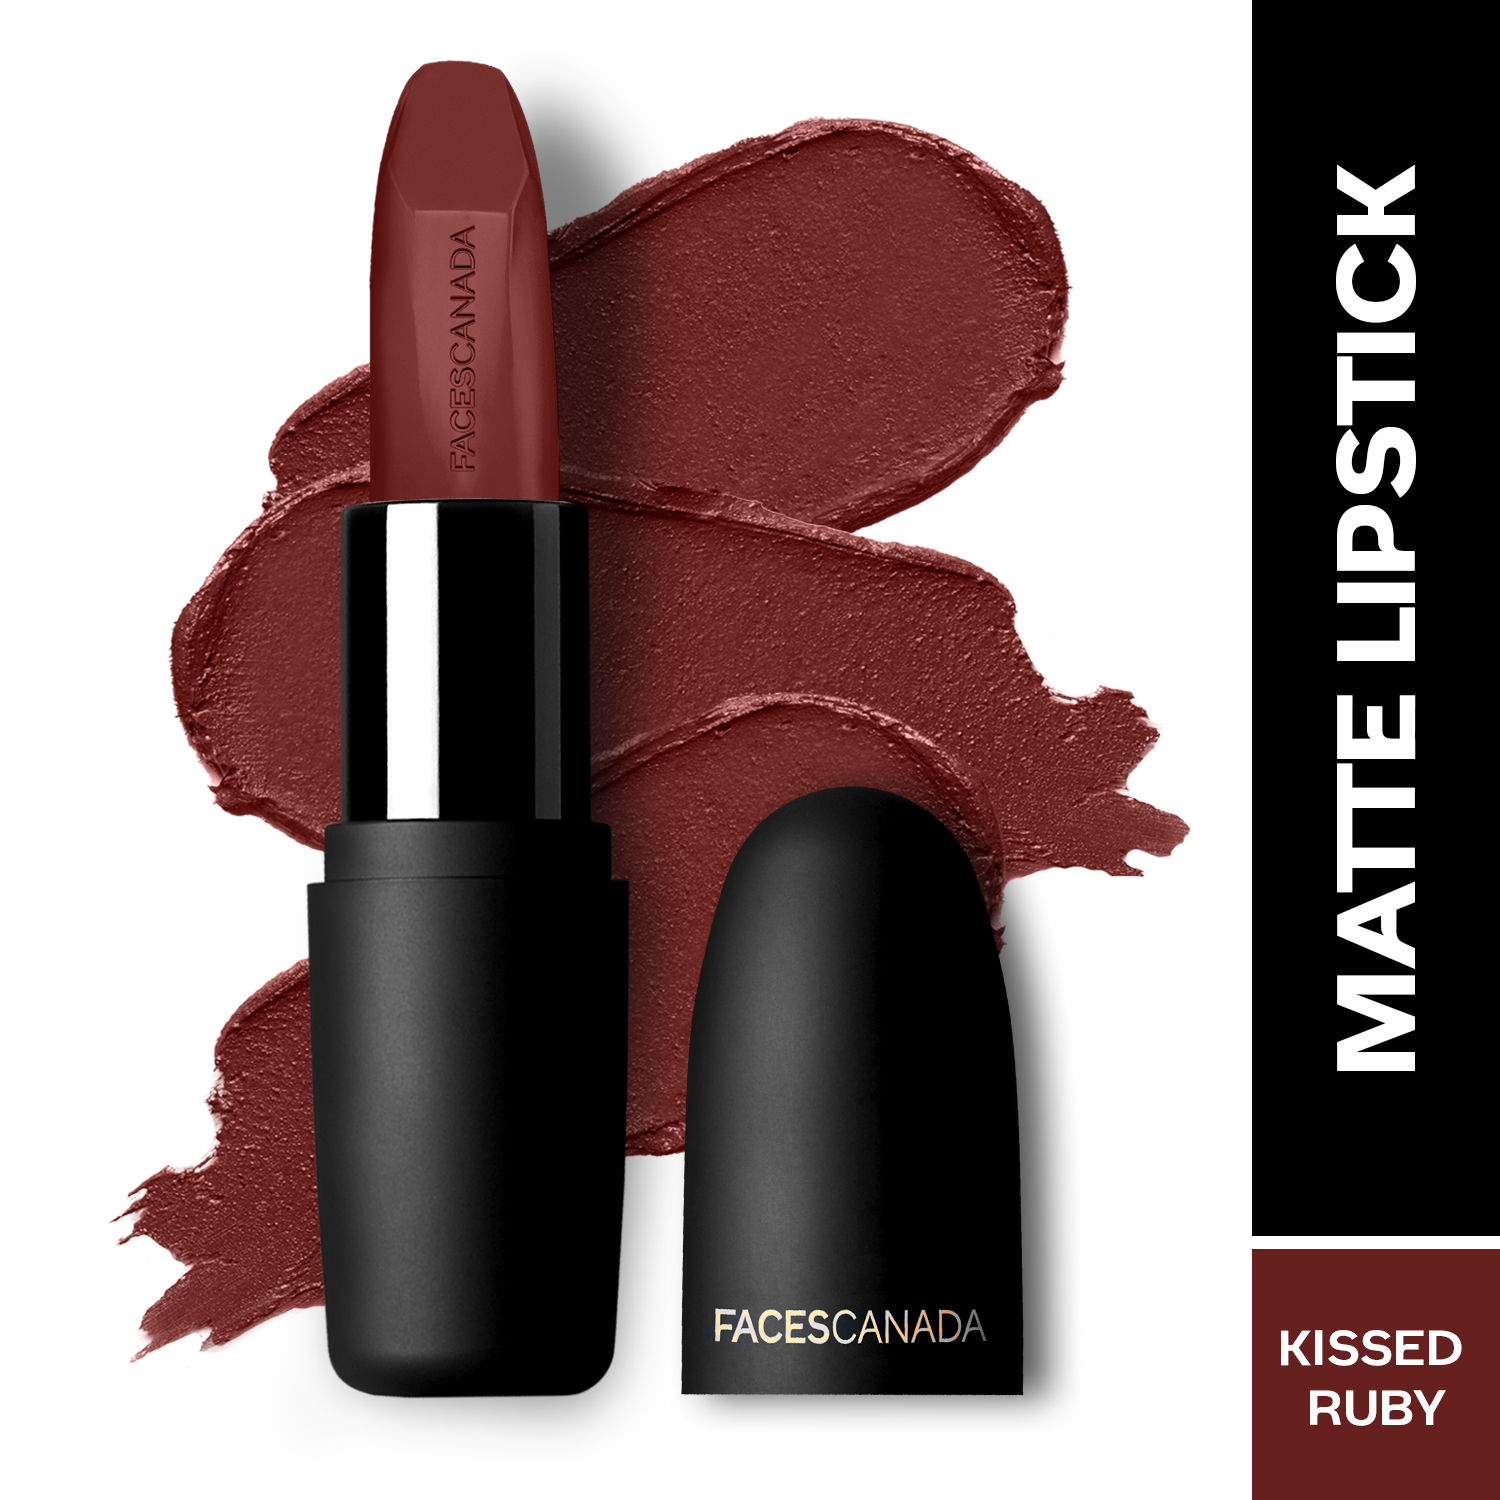 Buy FACES CANADA Weightless Matte Lipstick - Kissed Ruby 13, 4.5g | High Pigment | Smooth One Stroke Glide | Moisturizes & Hydrates Lips | Vitamin E, Jojoba & Almond Oil - Purplle